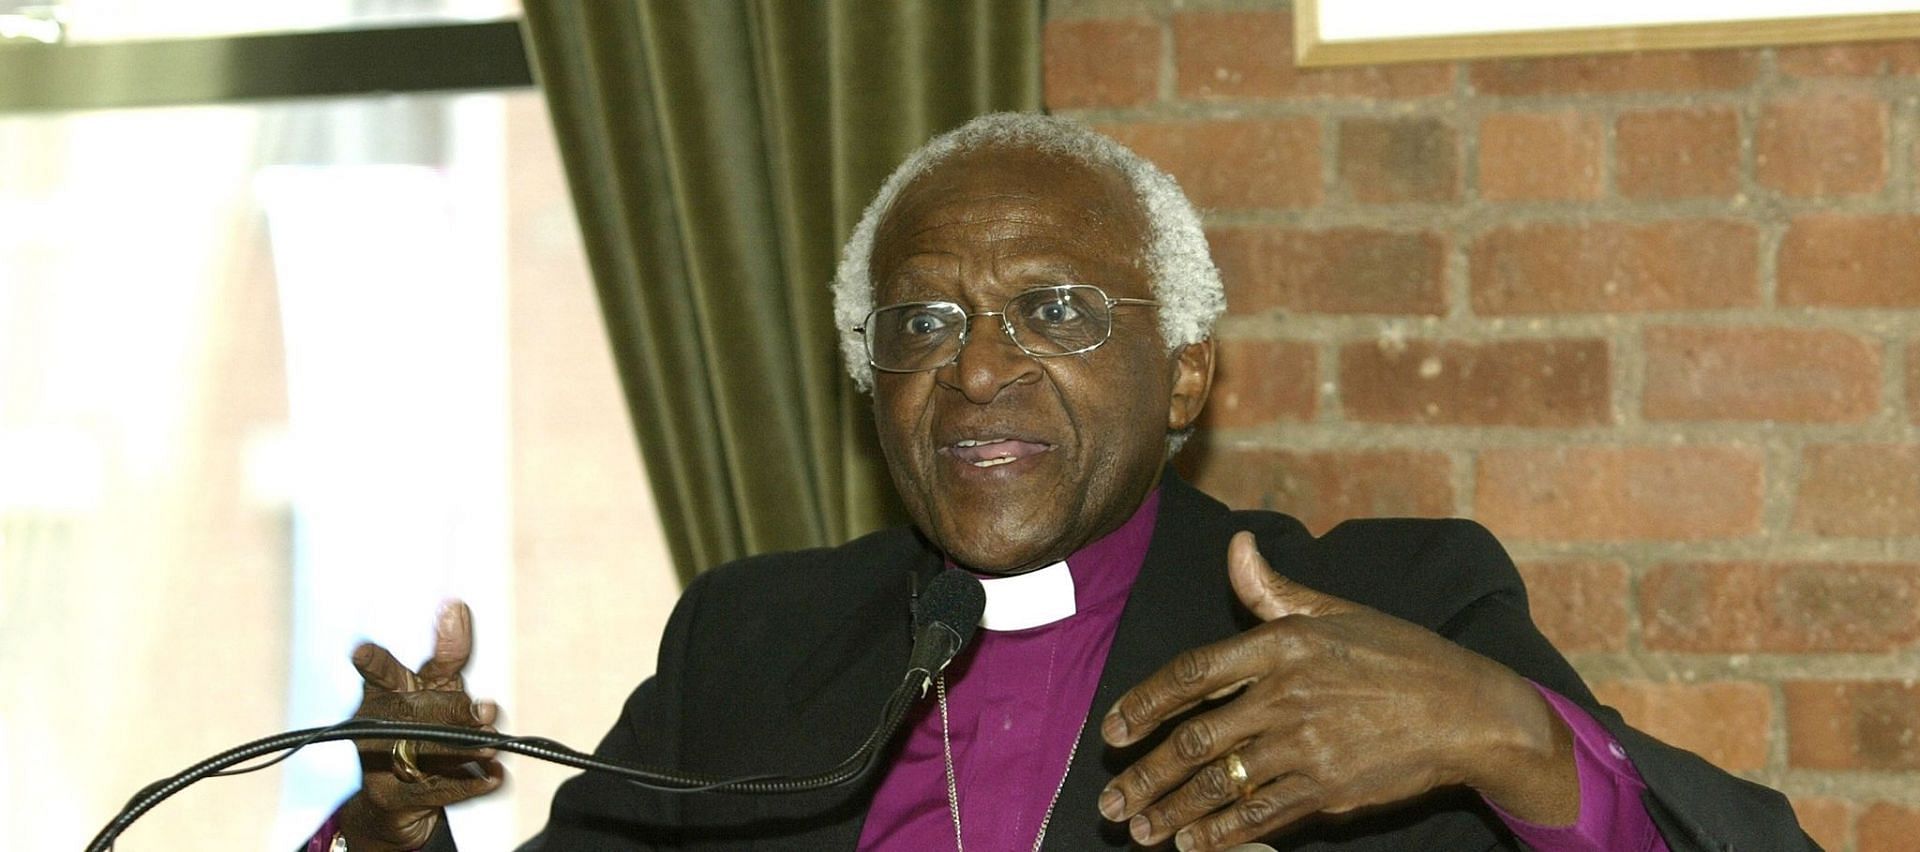 Desmond Tutu was the Anglican Archbishop of Cape Town (Image via Frank Micelotta/Getty Images)